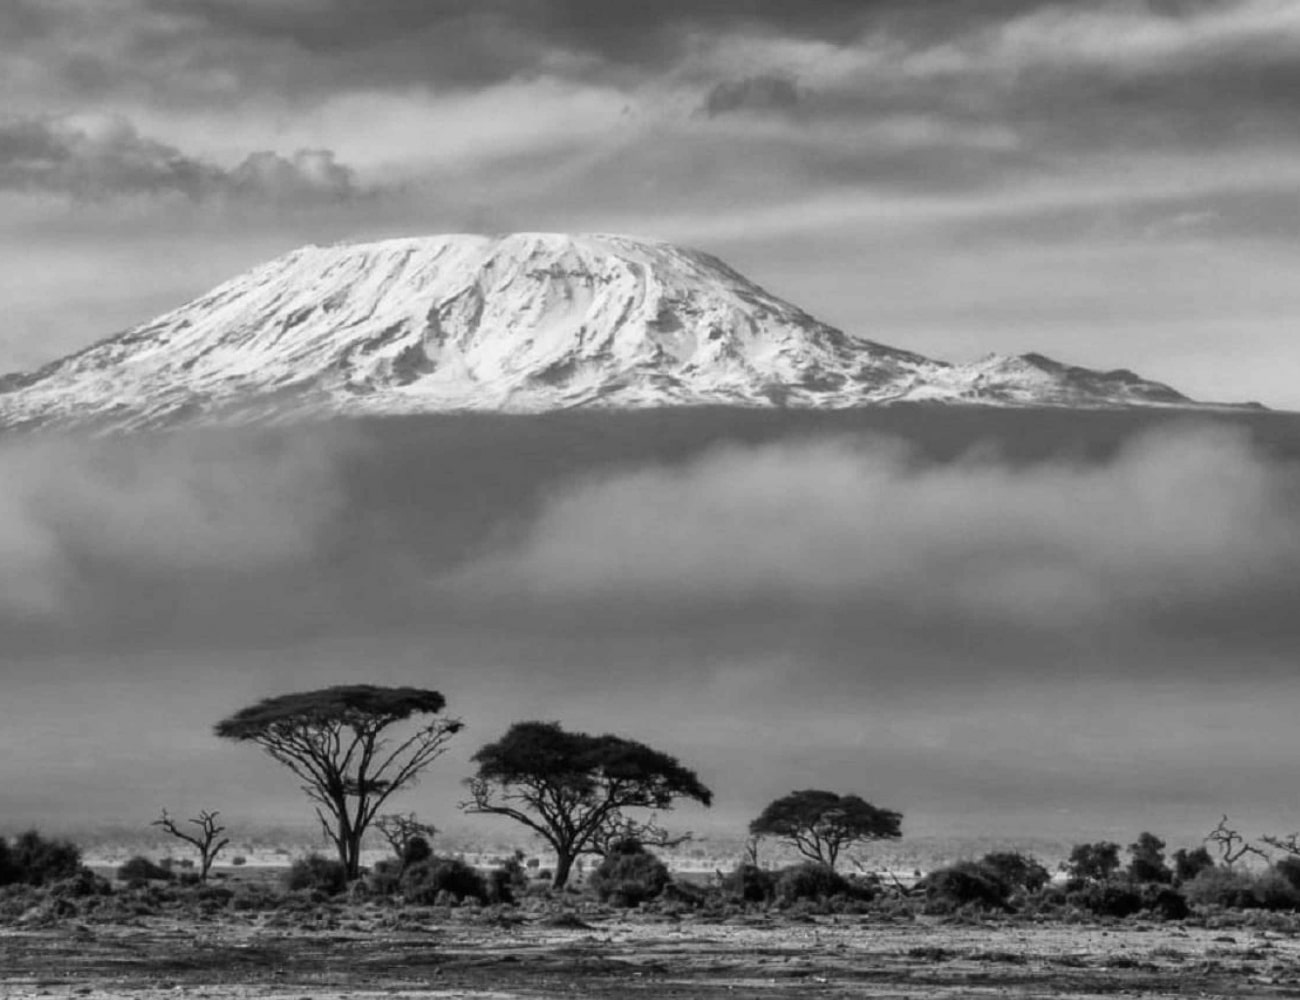 A View of Africa's Highest Peak